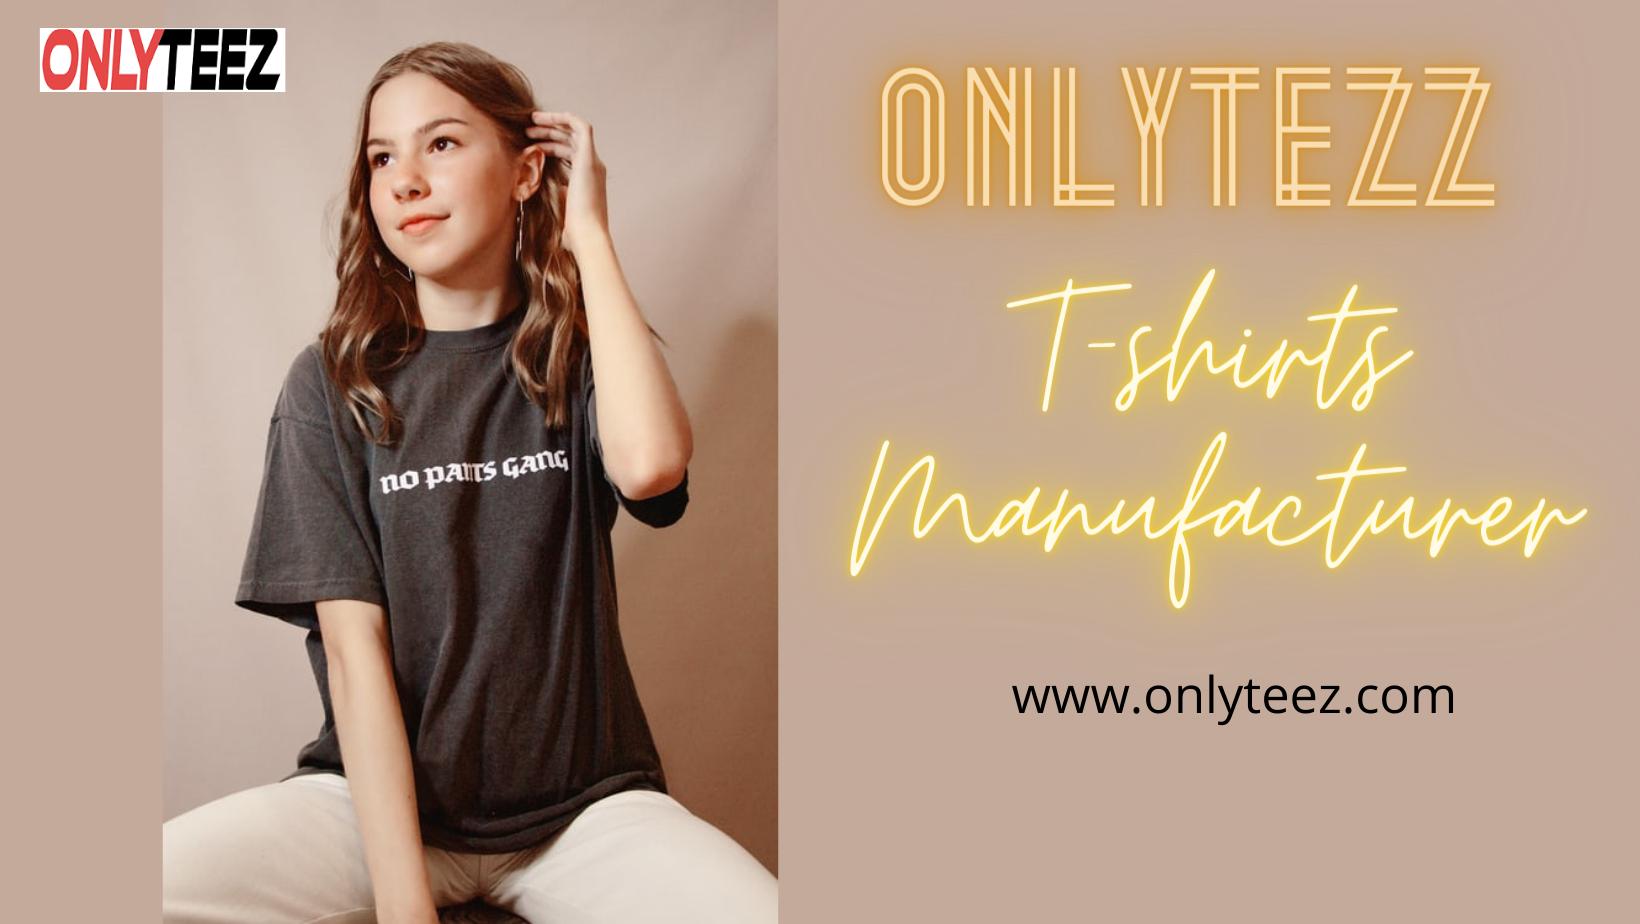 OnlyTeez-T Shirt Manufacturer - clothing store  | Photo 2 of 2 | Address: 8730 Wilshire Blvd, Beverly Hills, CA 90210, United States | Phone: (855) 525-2642